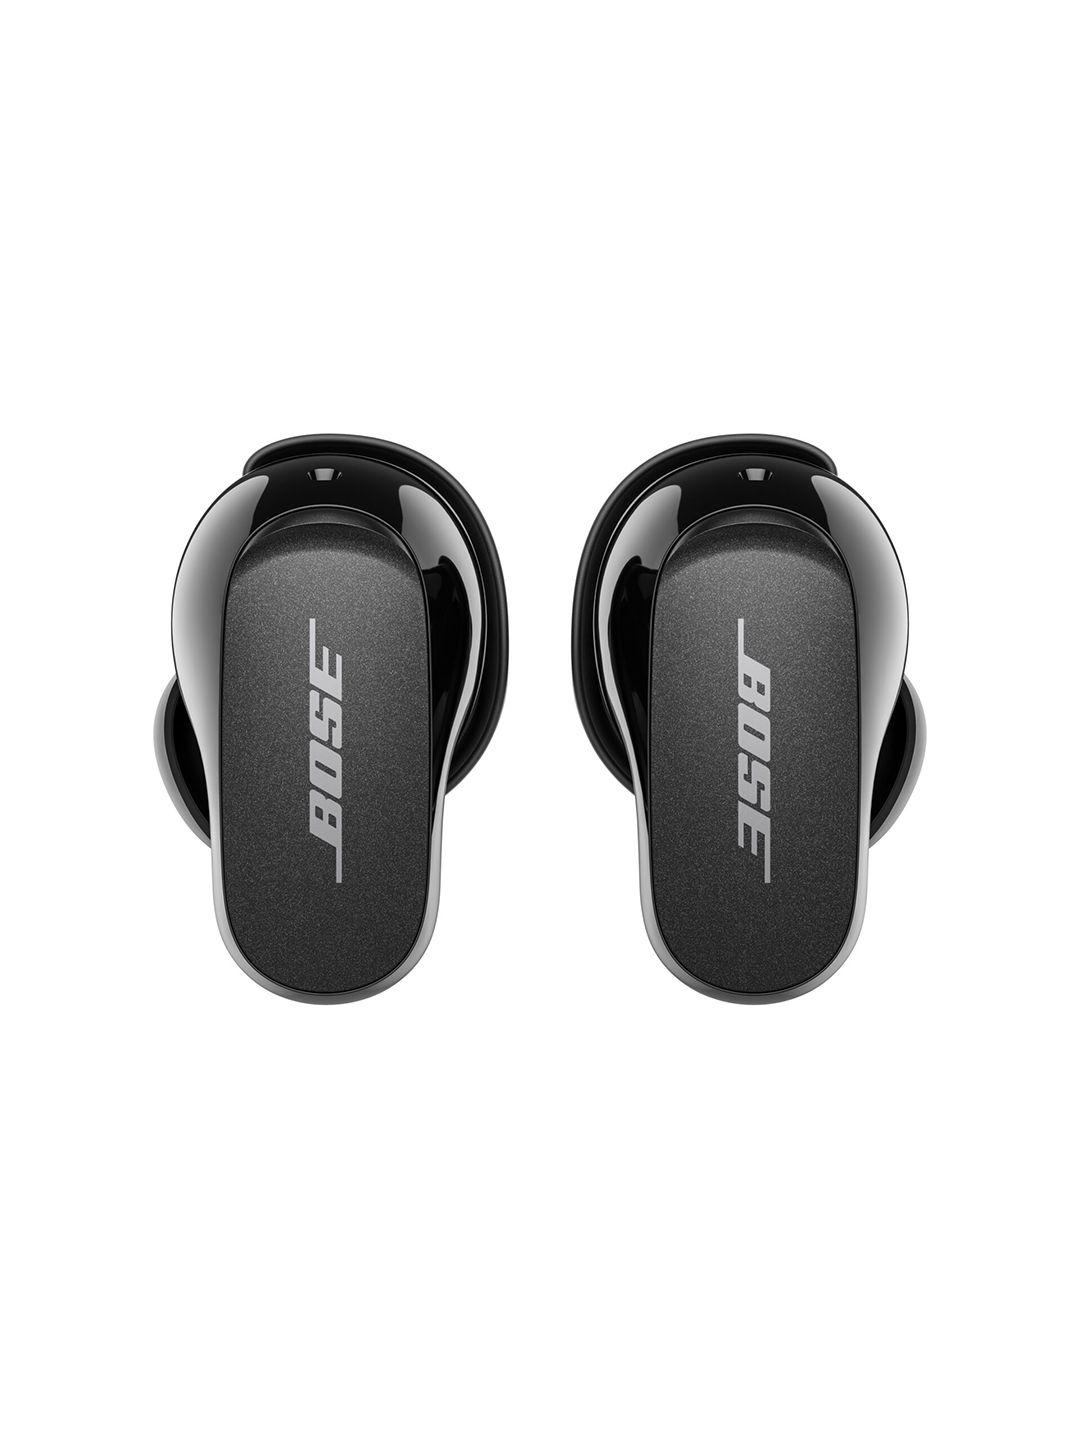 bose quiet comfort wireless noise cancelling in-ear earbuds